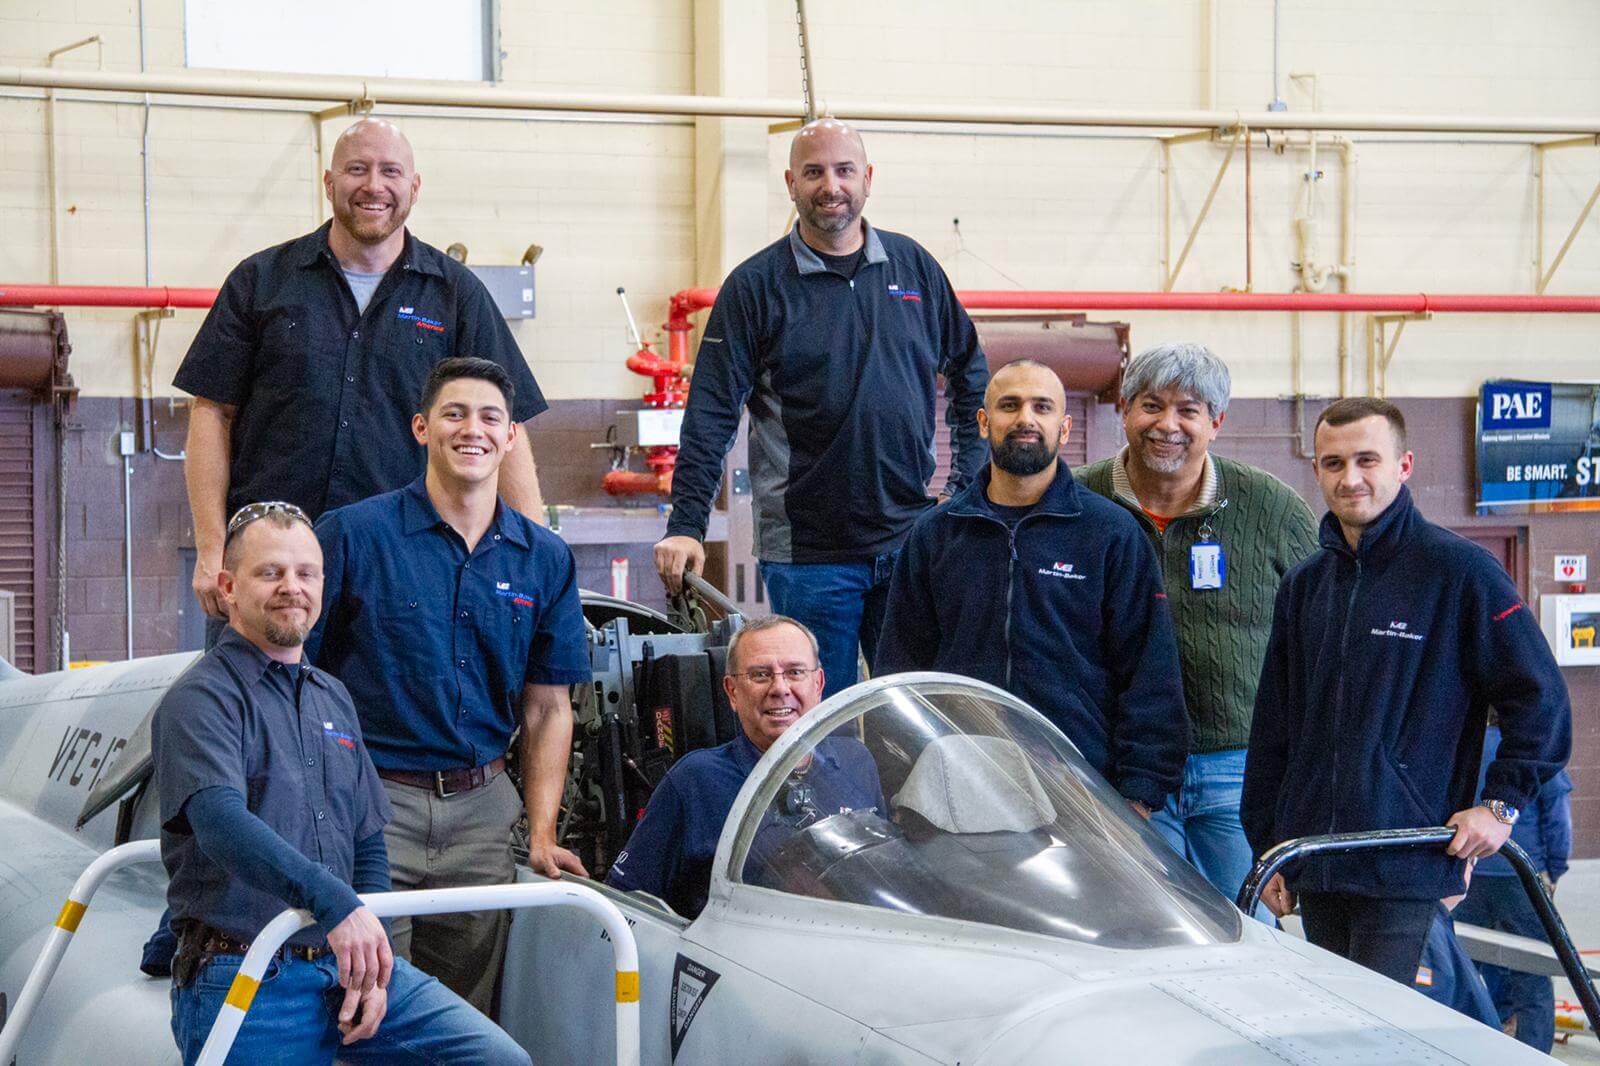 The Martin-Baker team are pictured here at NAS Fallon during the seat installation on the 5th December 2019.